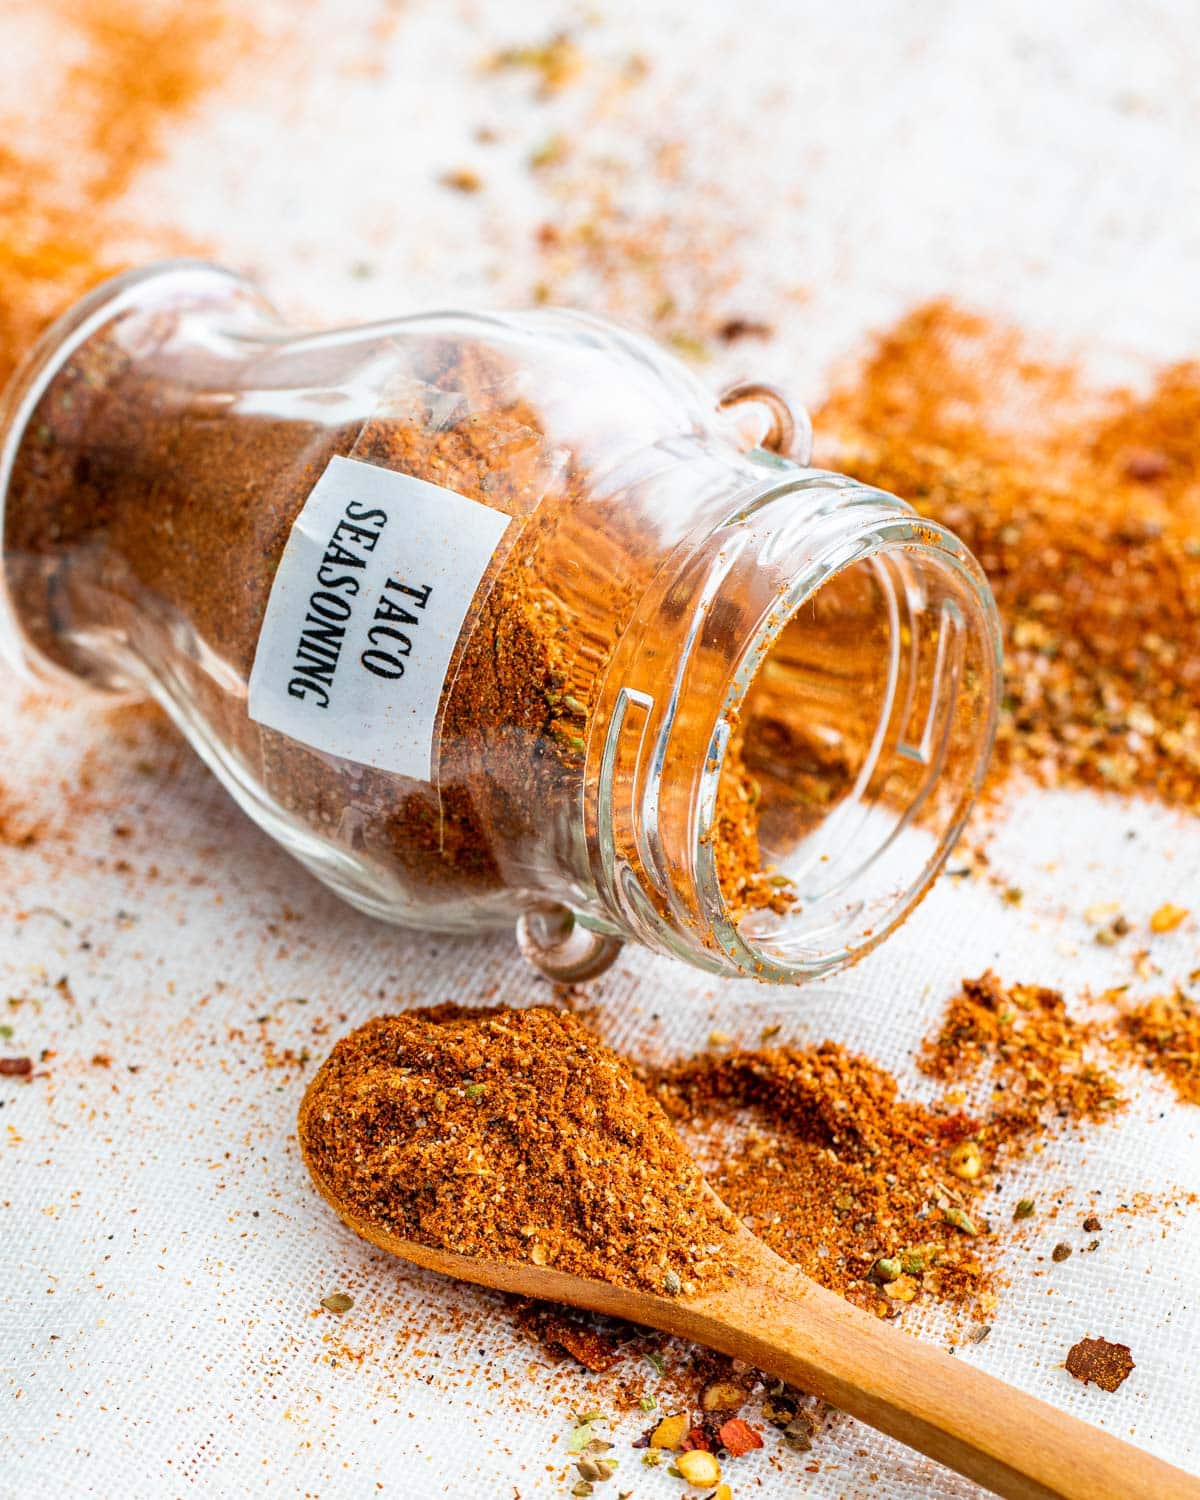 a small spice jar on its side with taco seasoning inside and a mini wooden spoon next to it